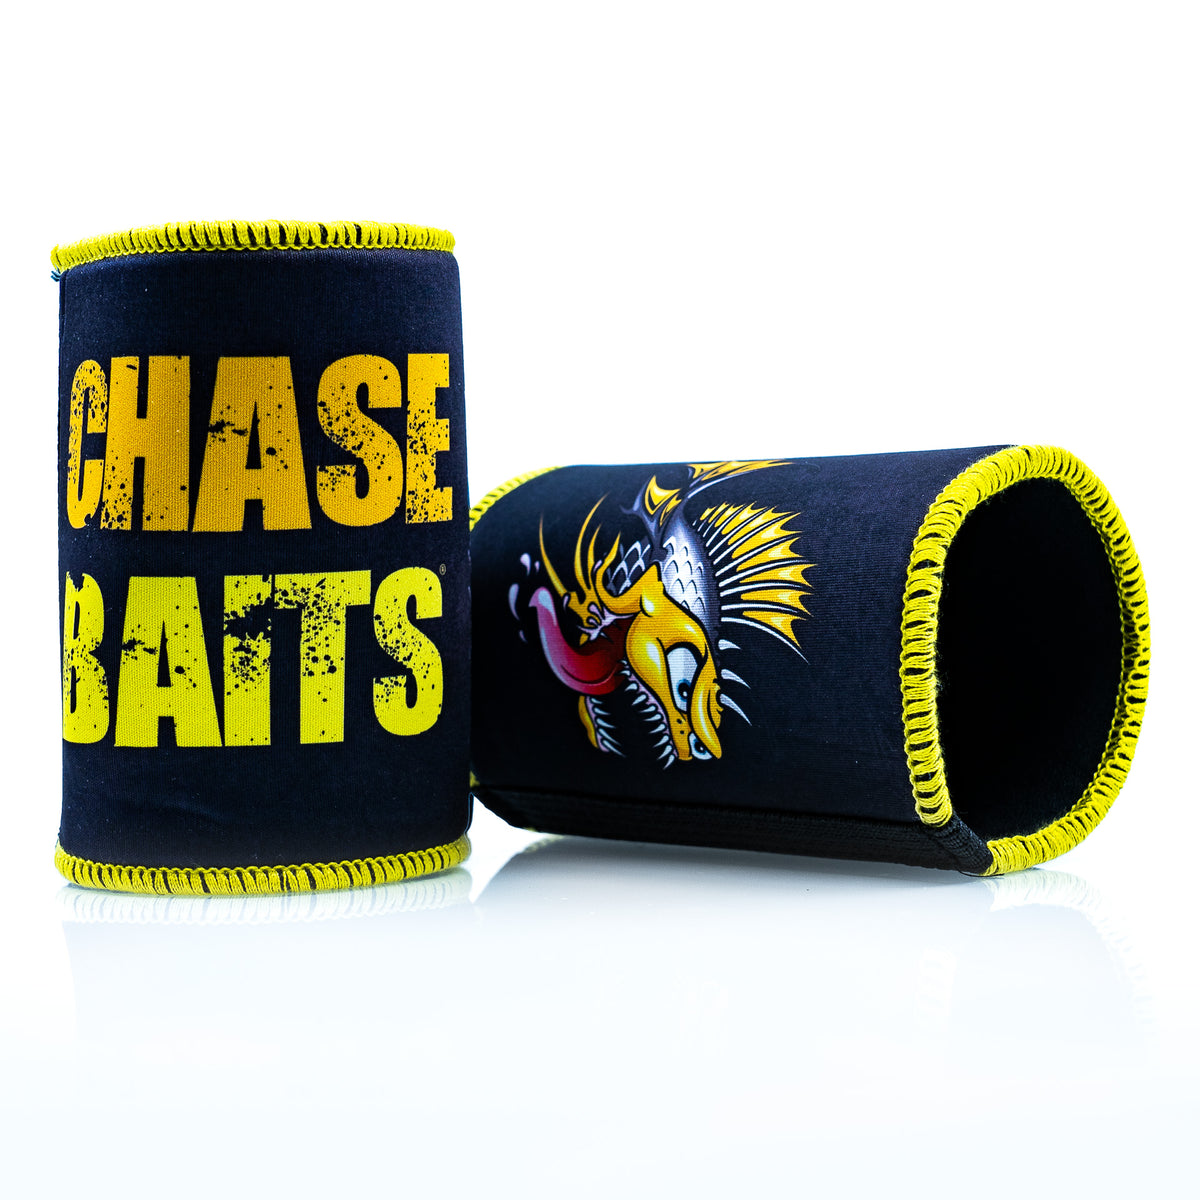 Chasebaits Stubby Cooler - Twin Pack